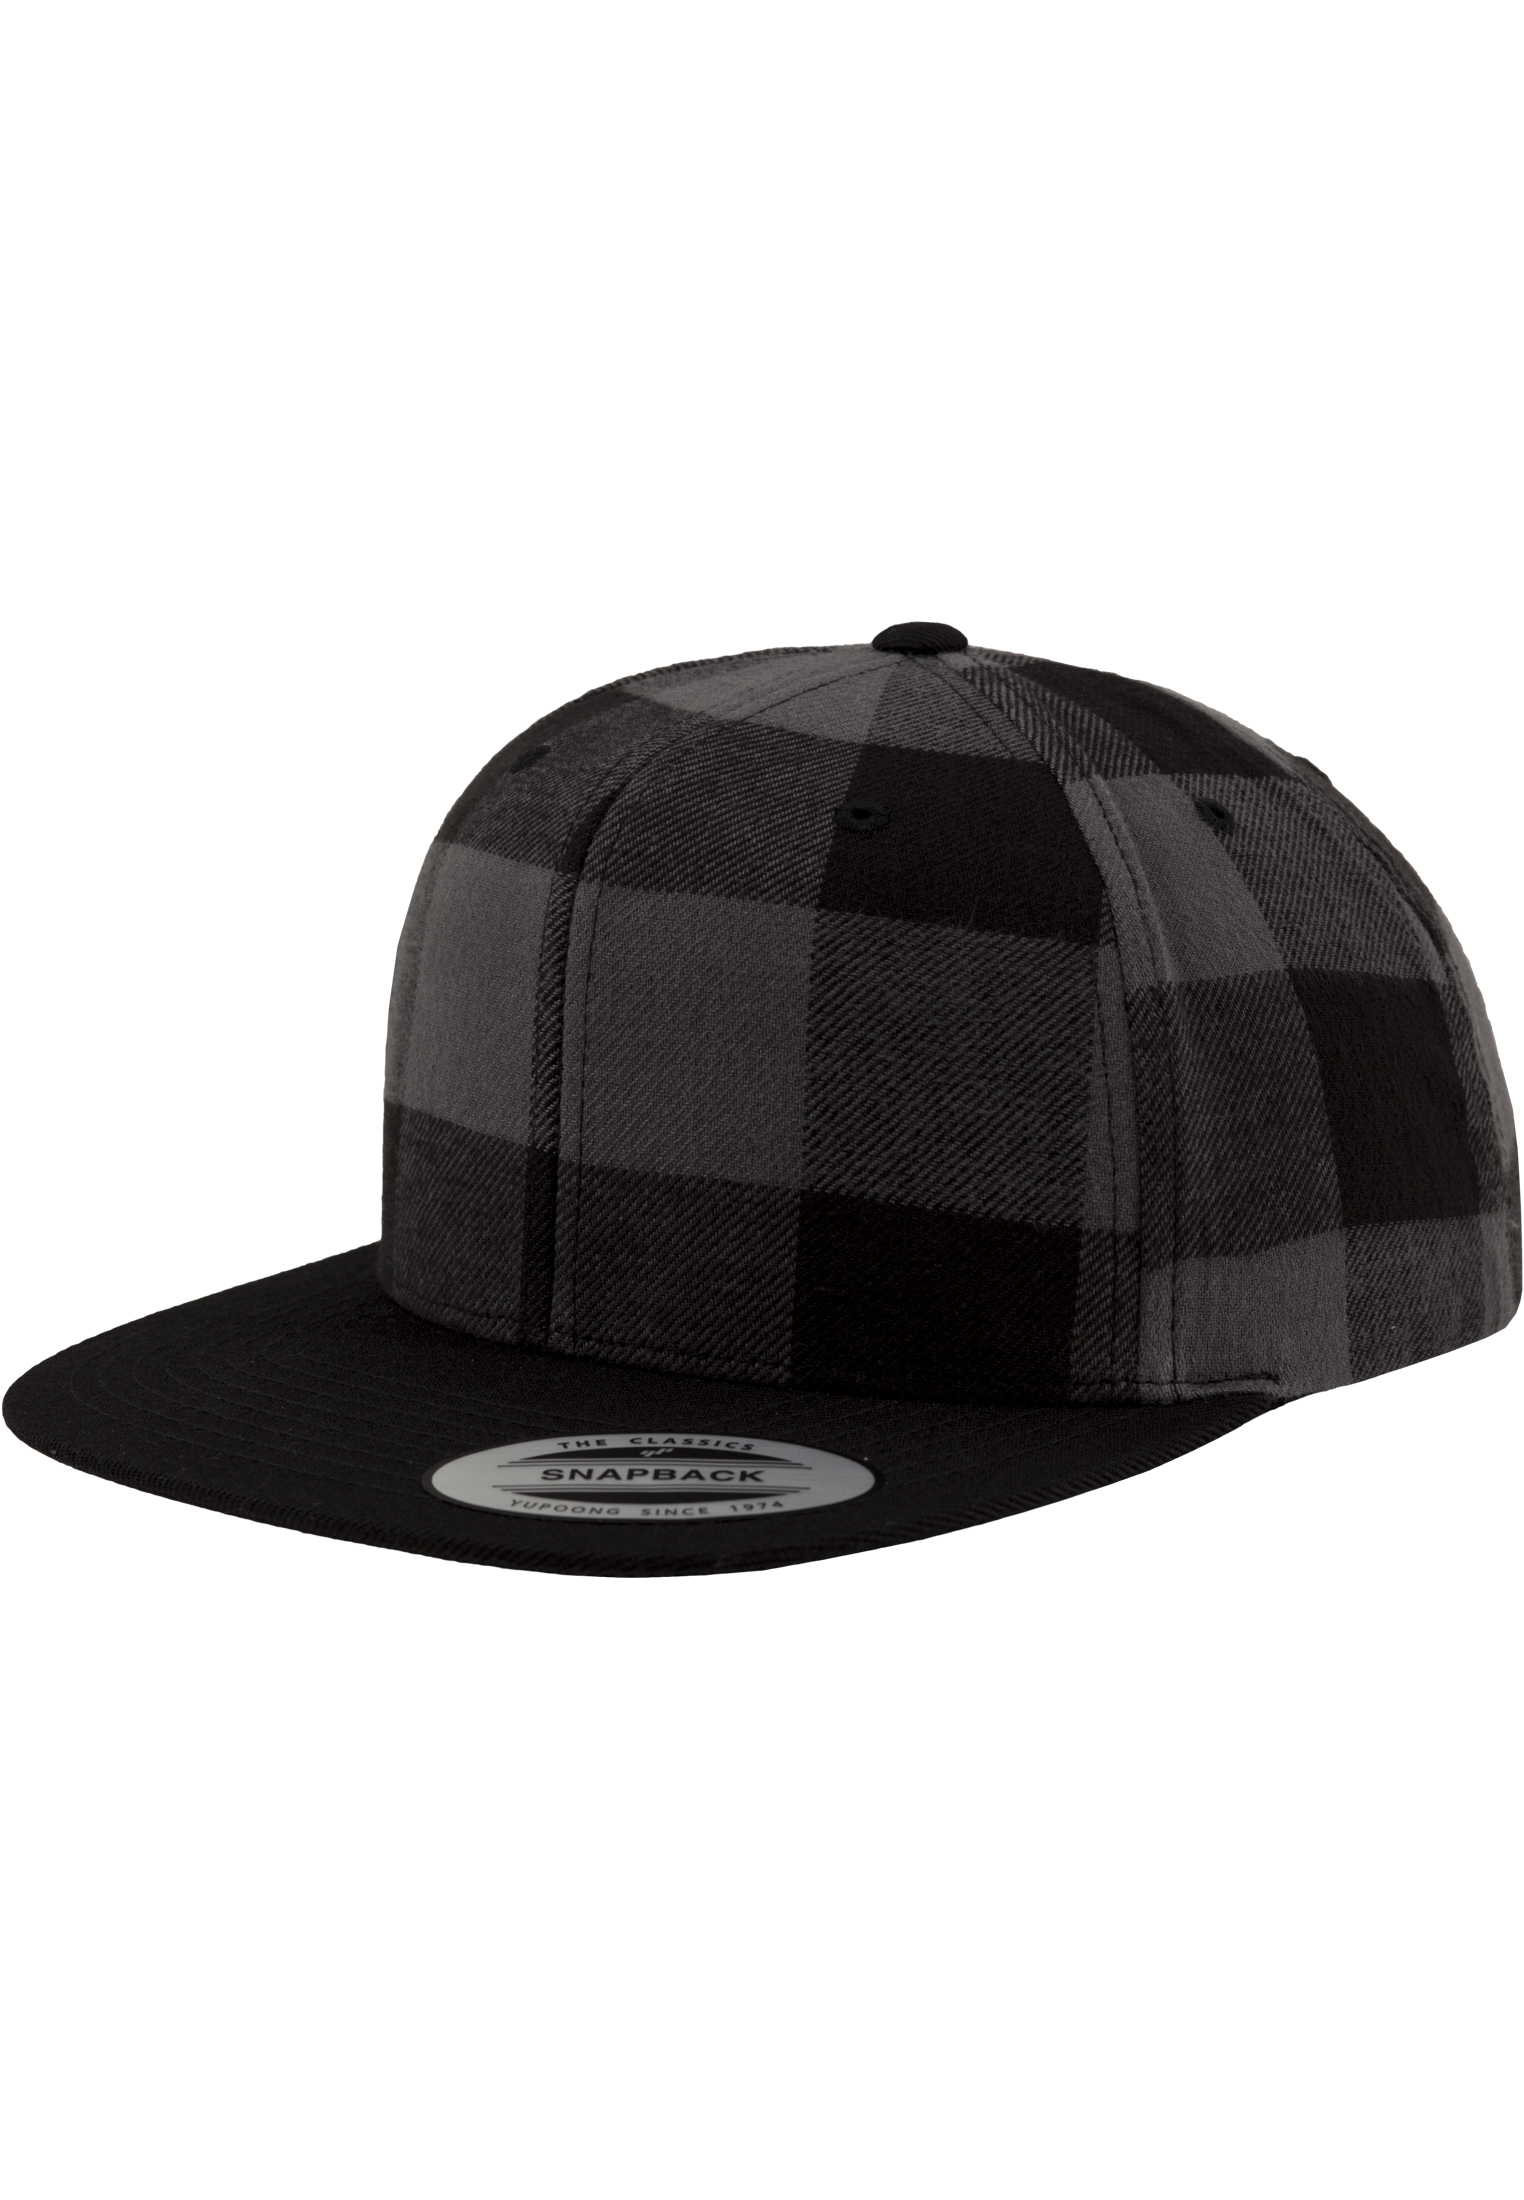 Snapback Checked Flanell Snapback in Farbe blk/cha